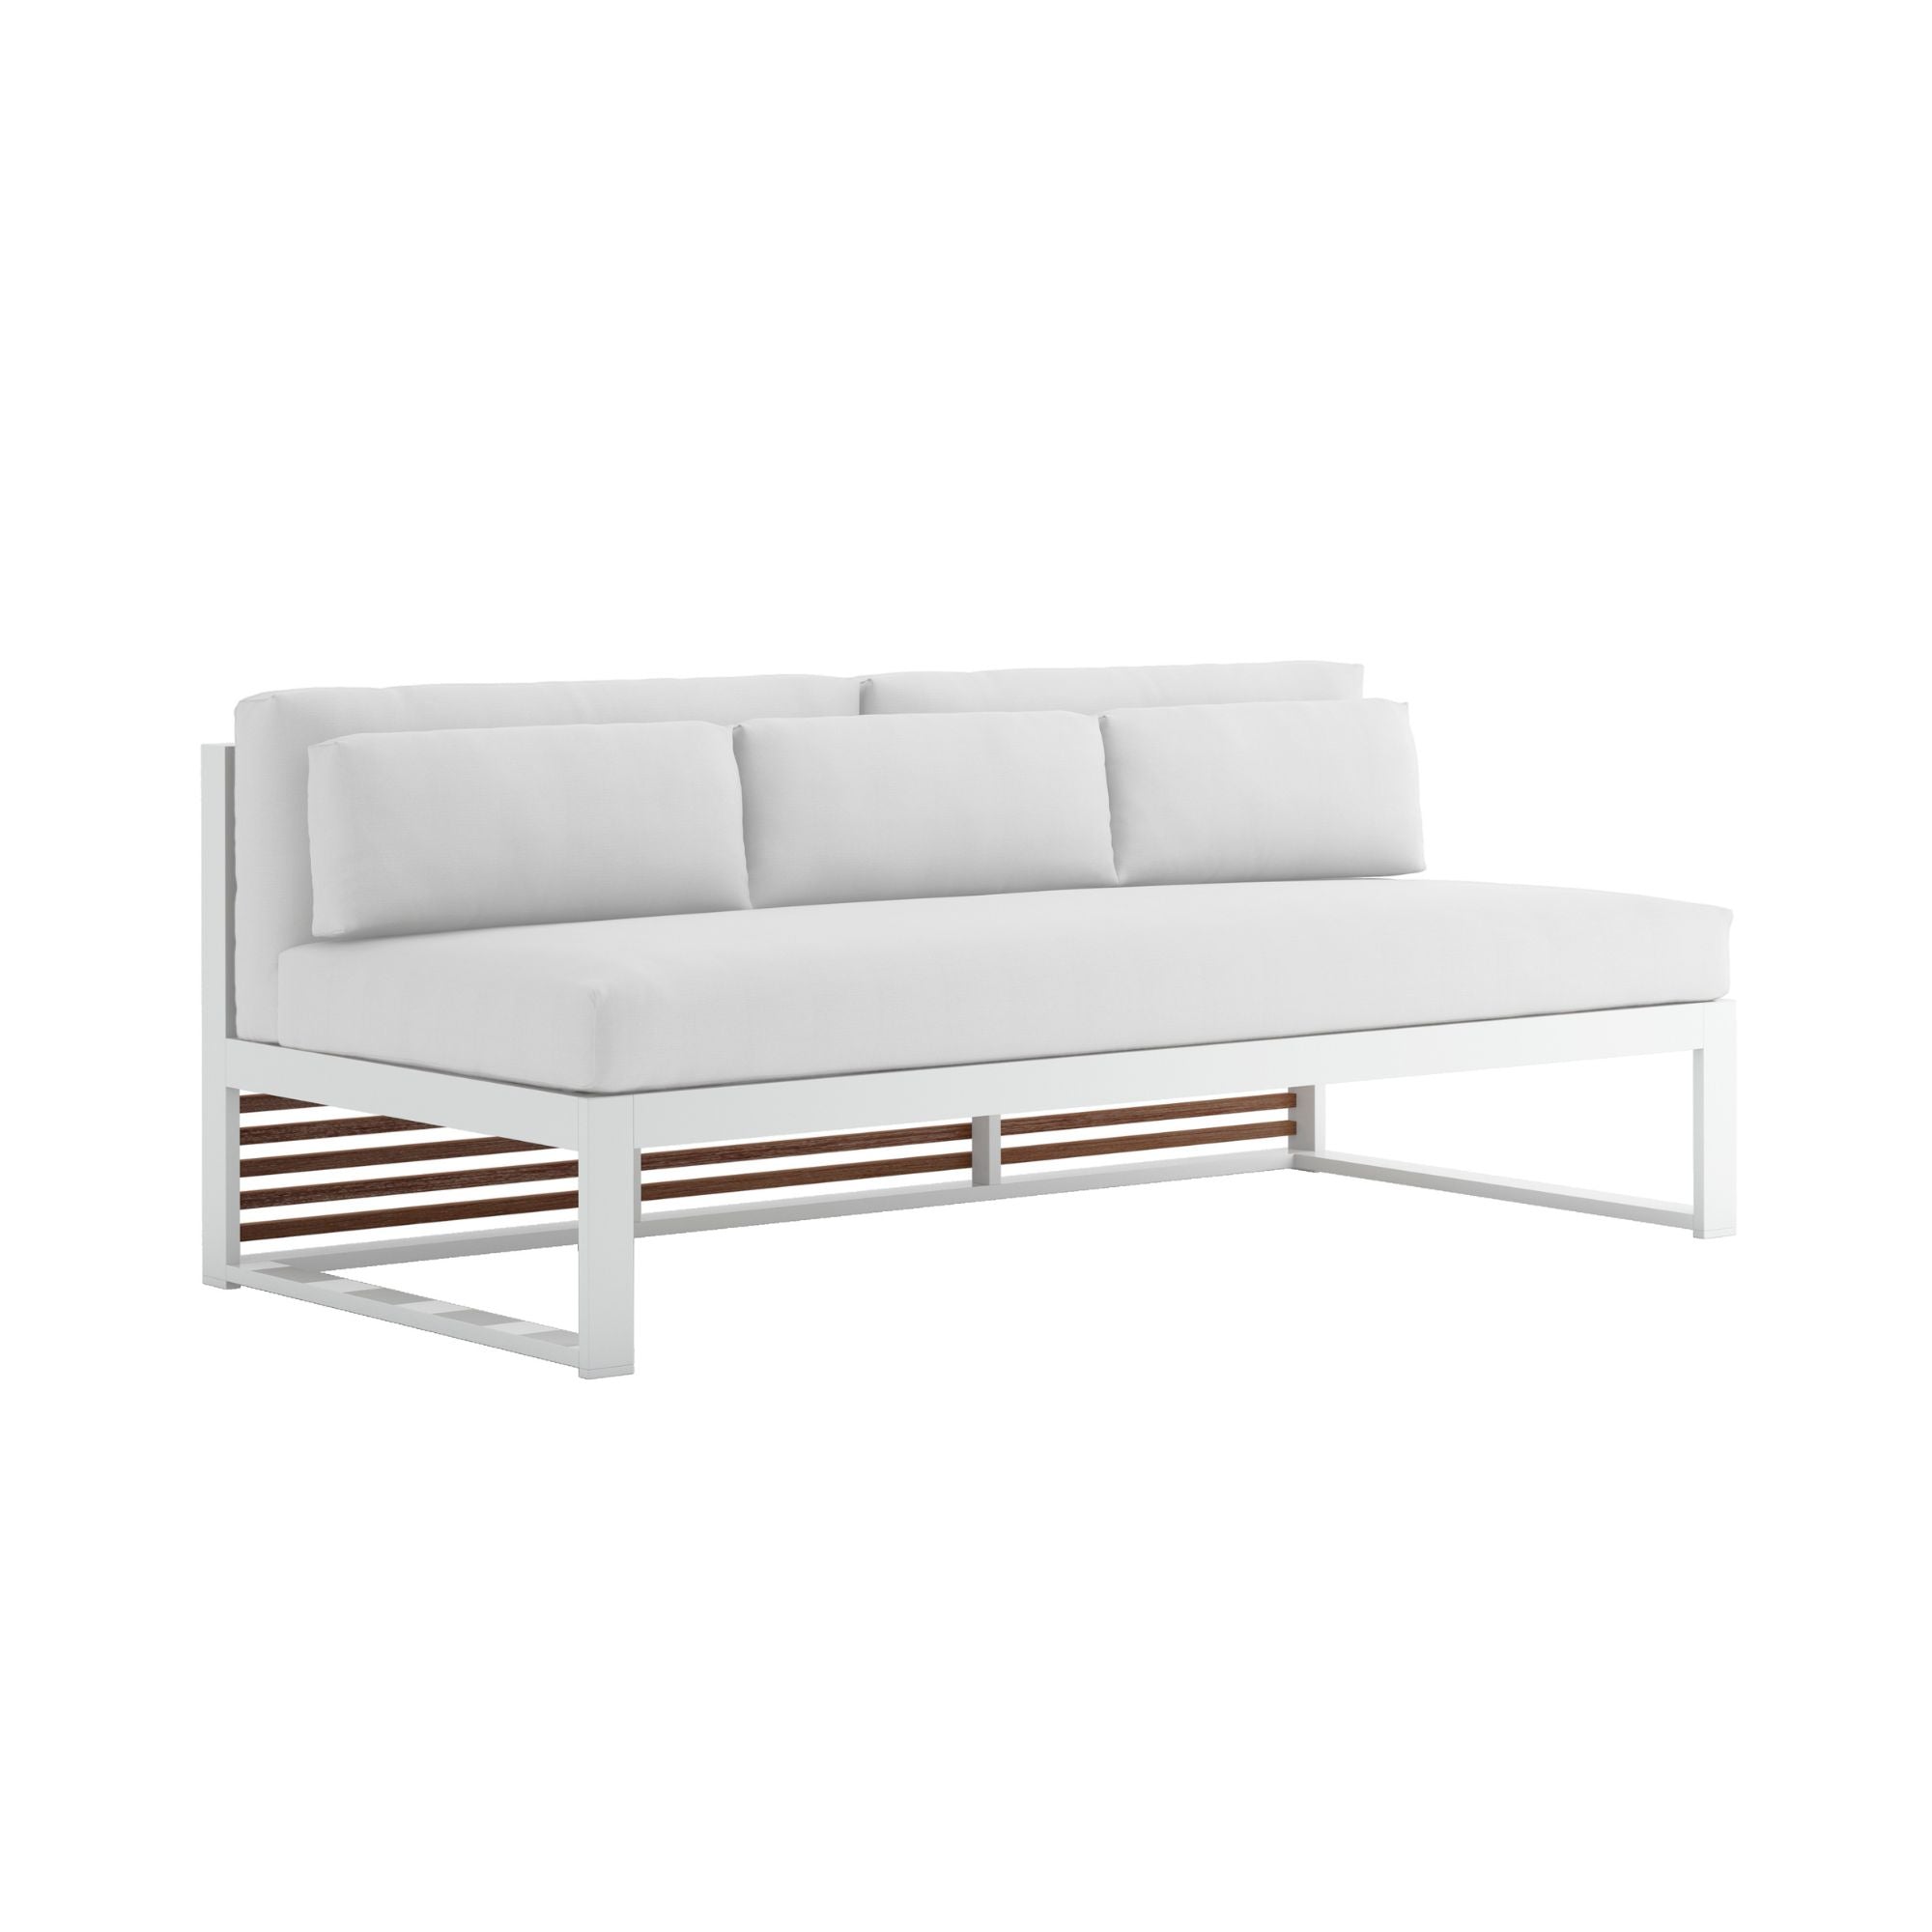 DNA Teak Sectional 4 - THAT COOL LIVING